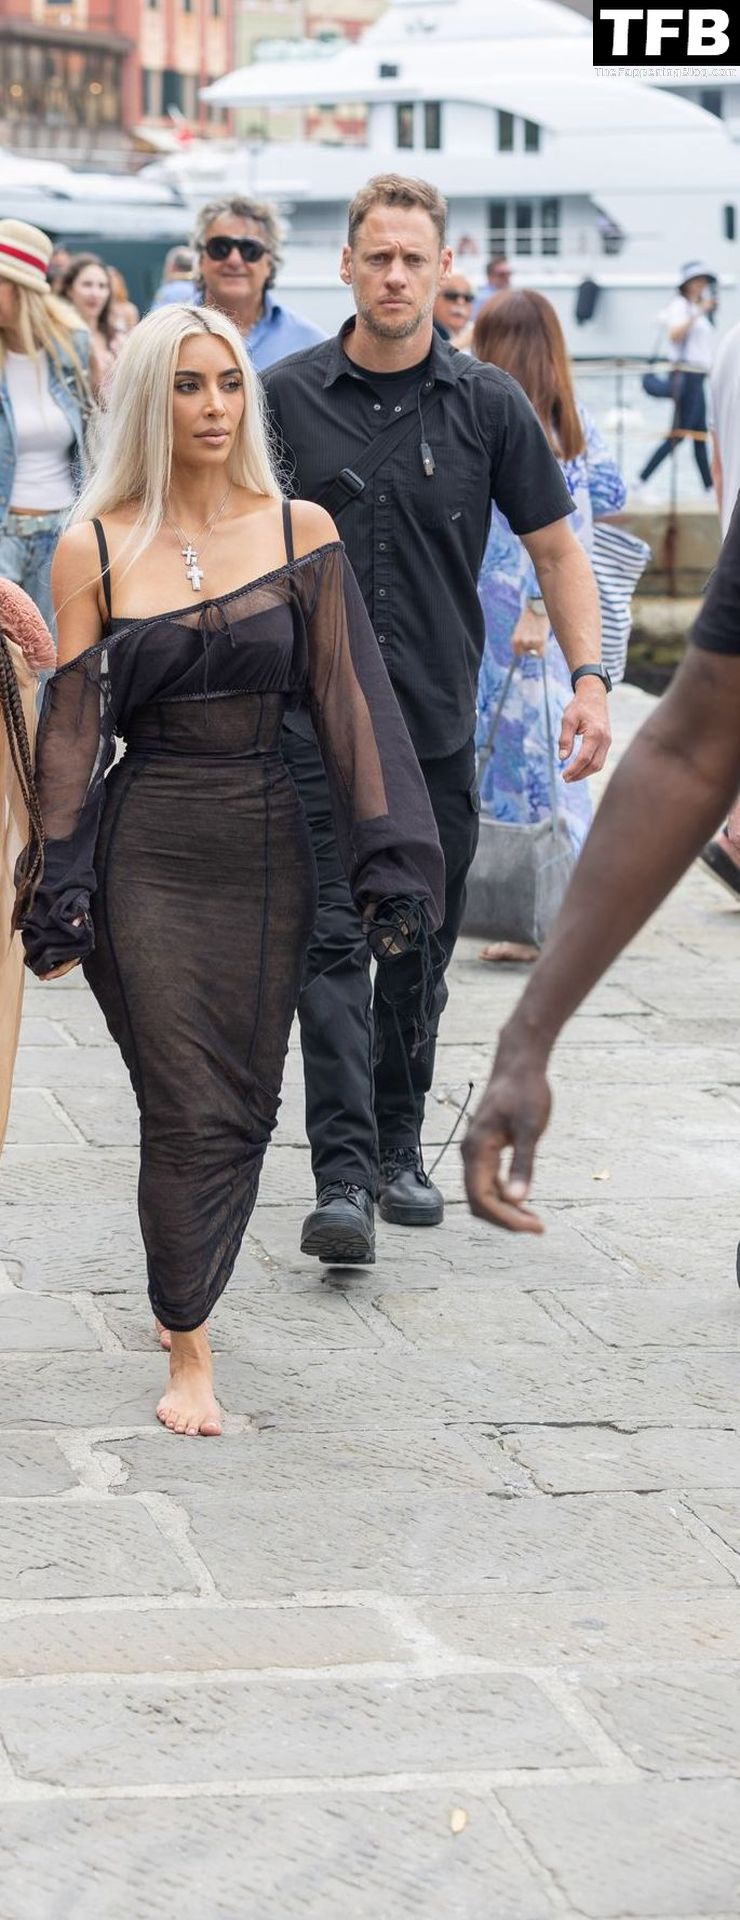 Kim Kardashian is Pictured in a Black Outfit in Portofino (28 Photos)